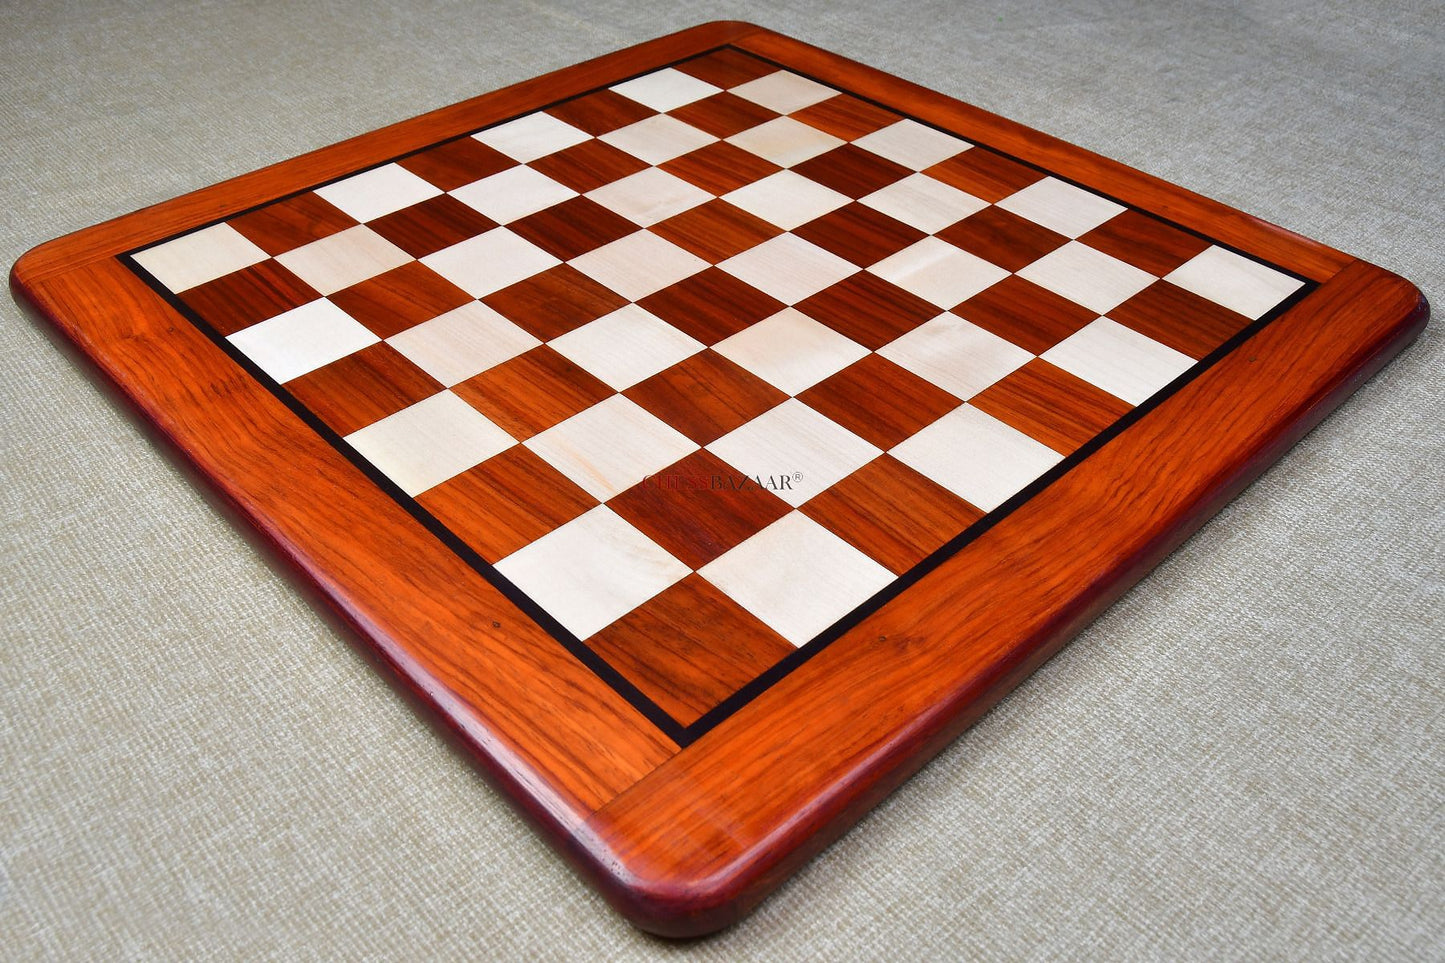 Wooden Chess Board Blood Red Bud Rose Wood 18" - 45 mm